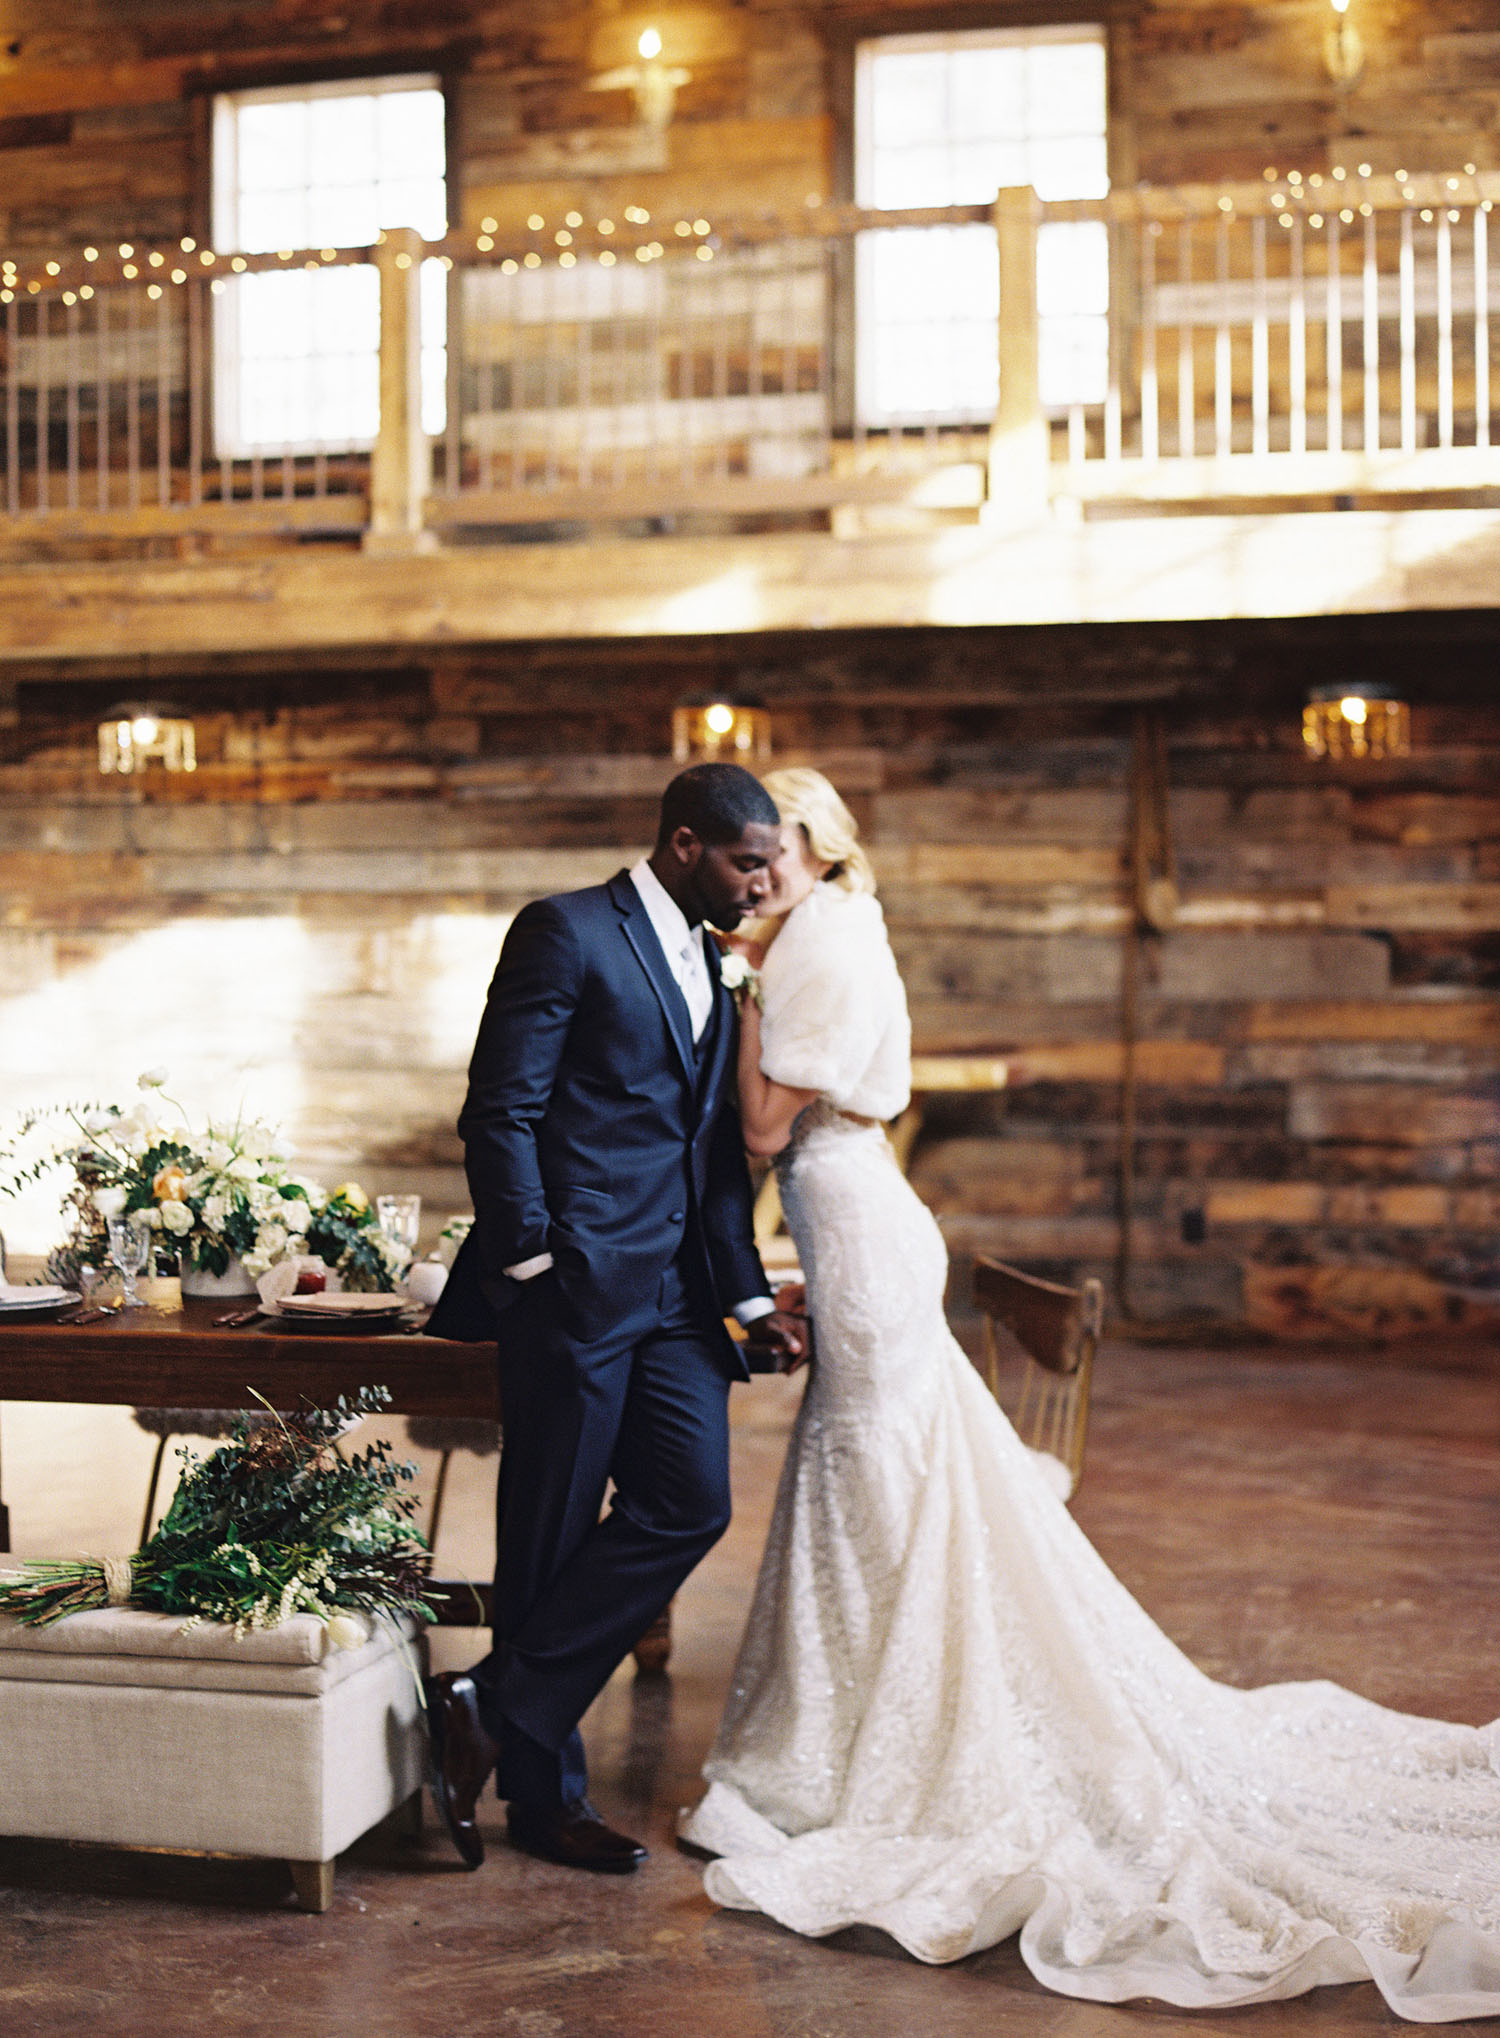 Colorado Wedding Inspiration by The Styled Soiree at Wild Canyon Ranch | Colorado Wedding Planner | Photo: Carrie King